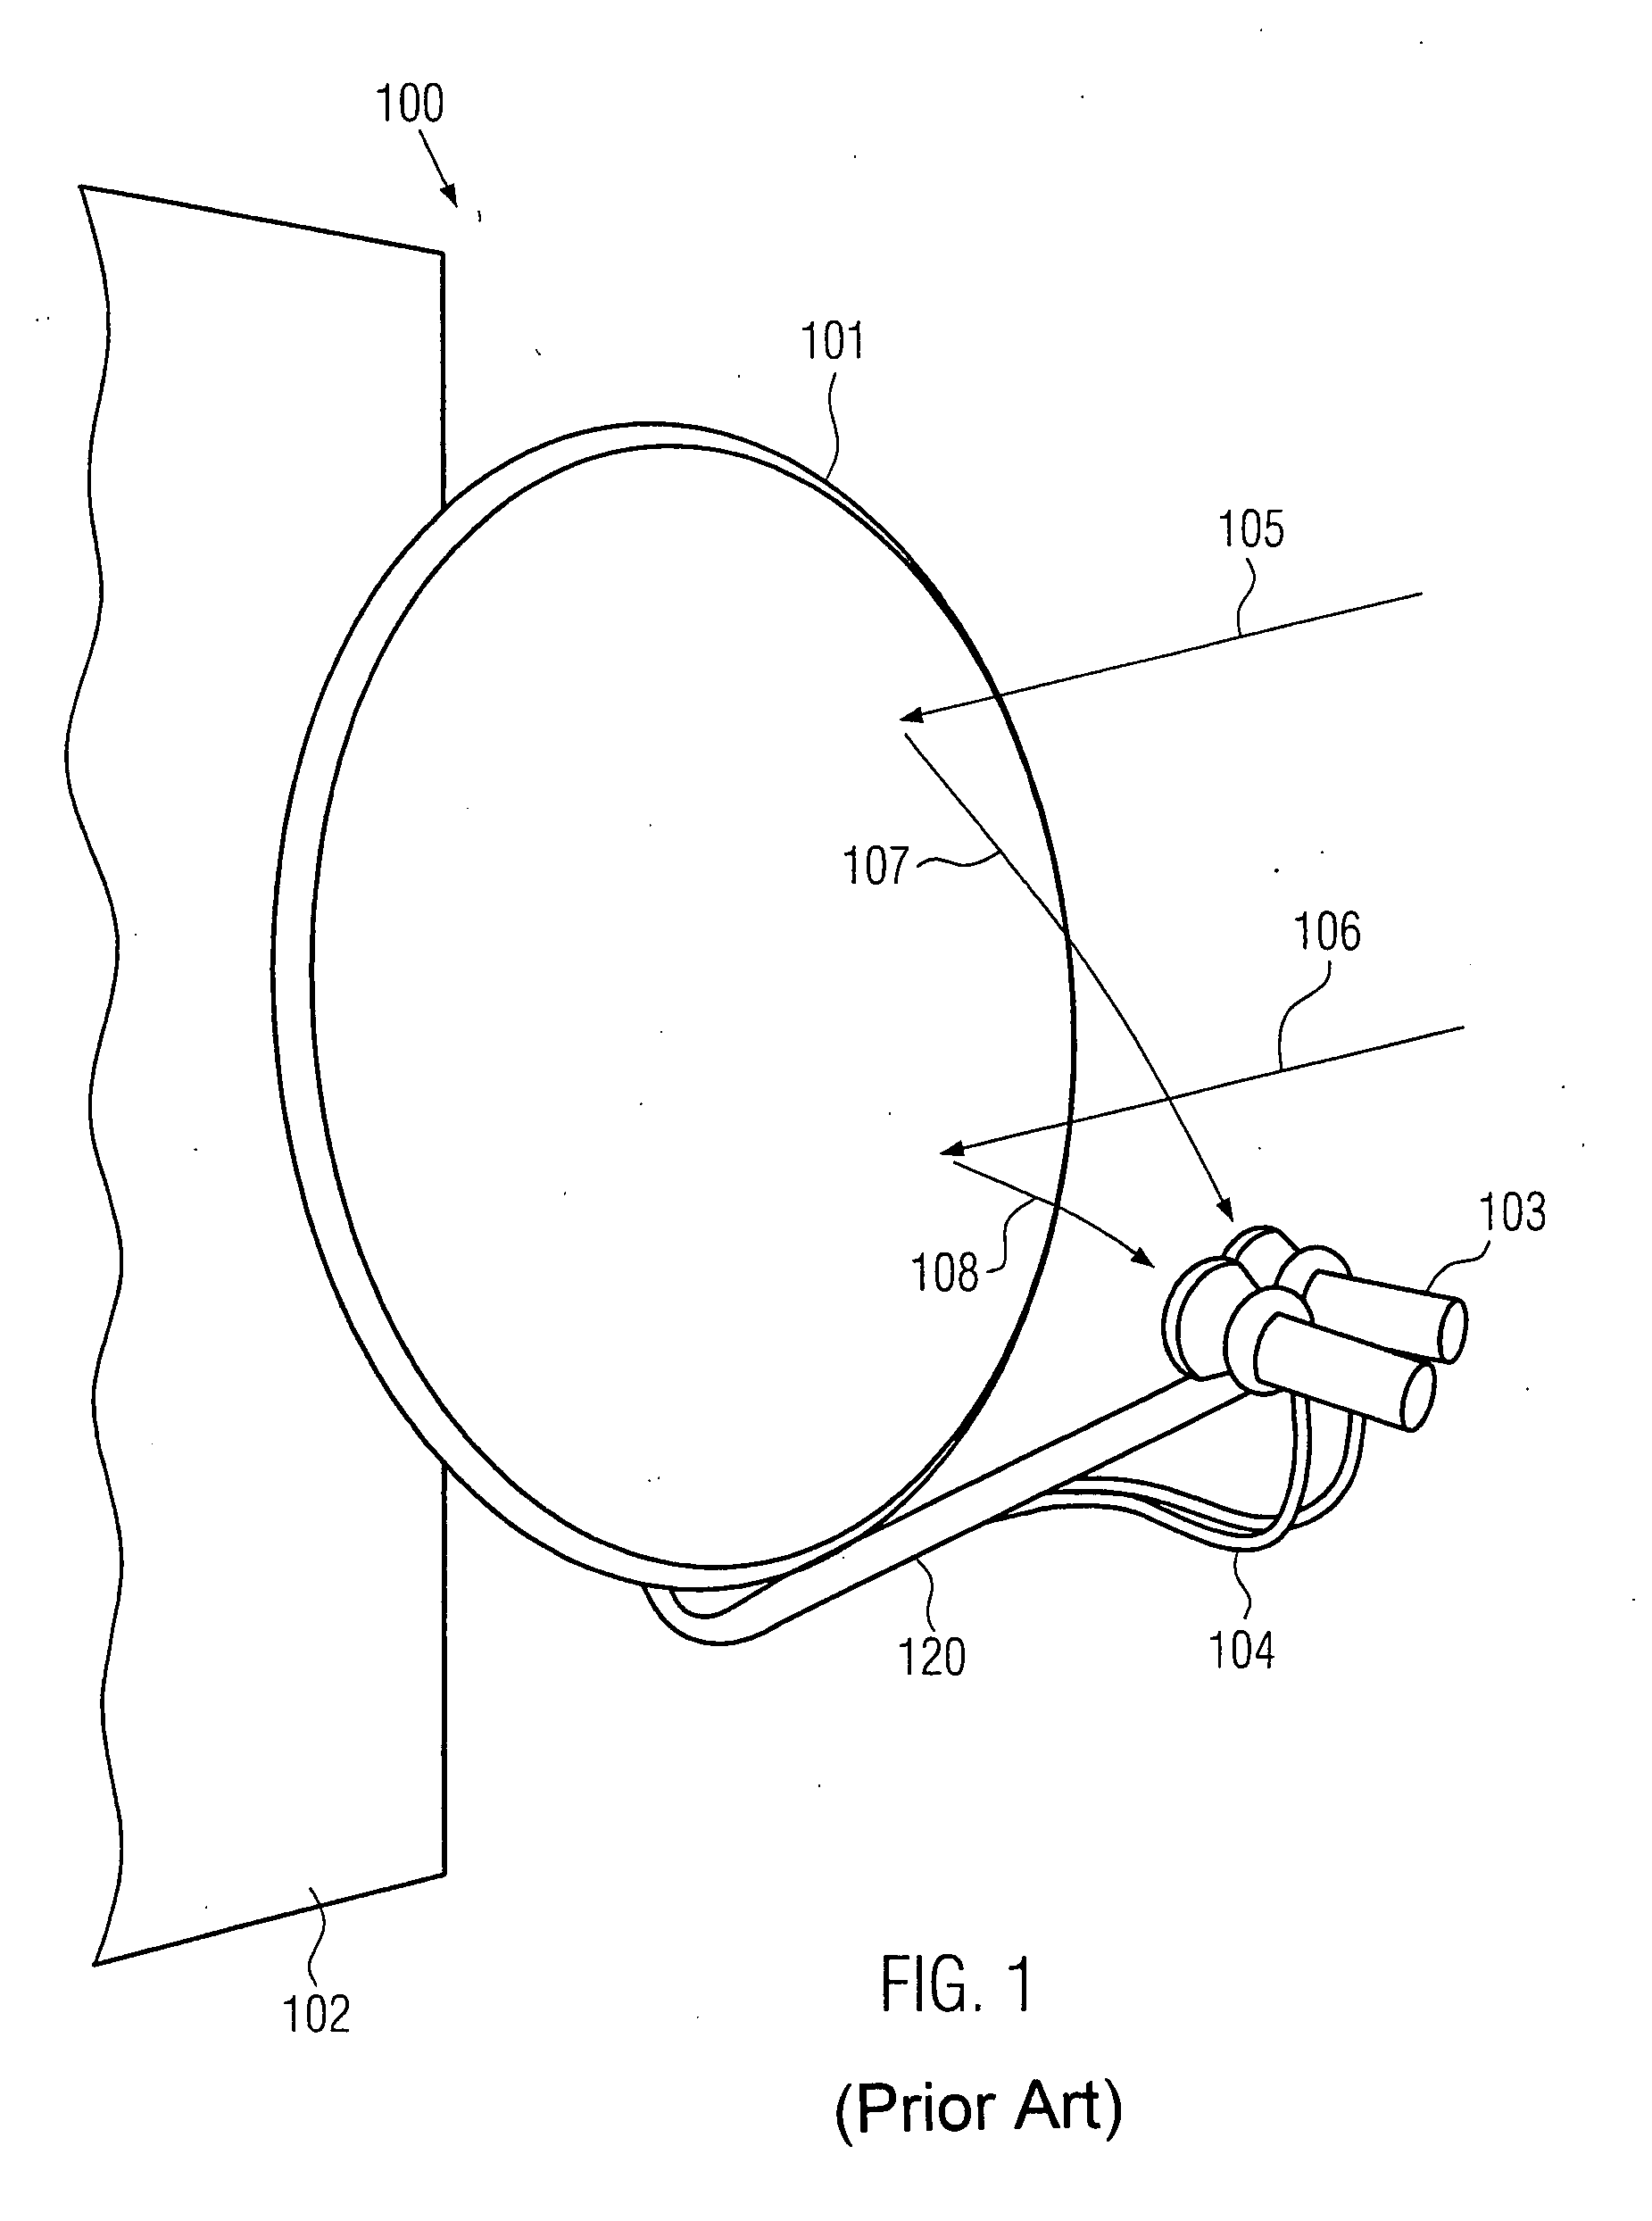 Antenna, method of manufacturing an antenna and apparatus for manufacturing an antenna